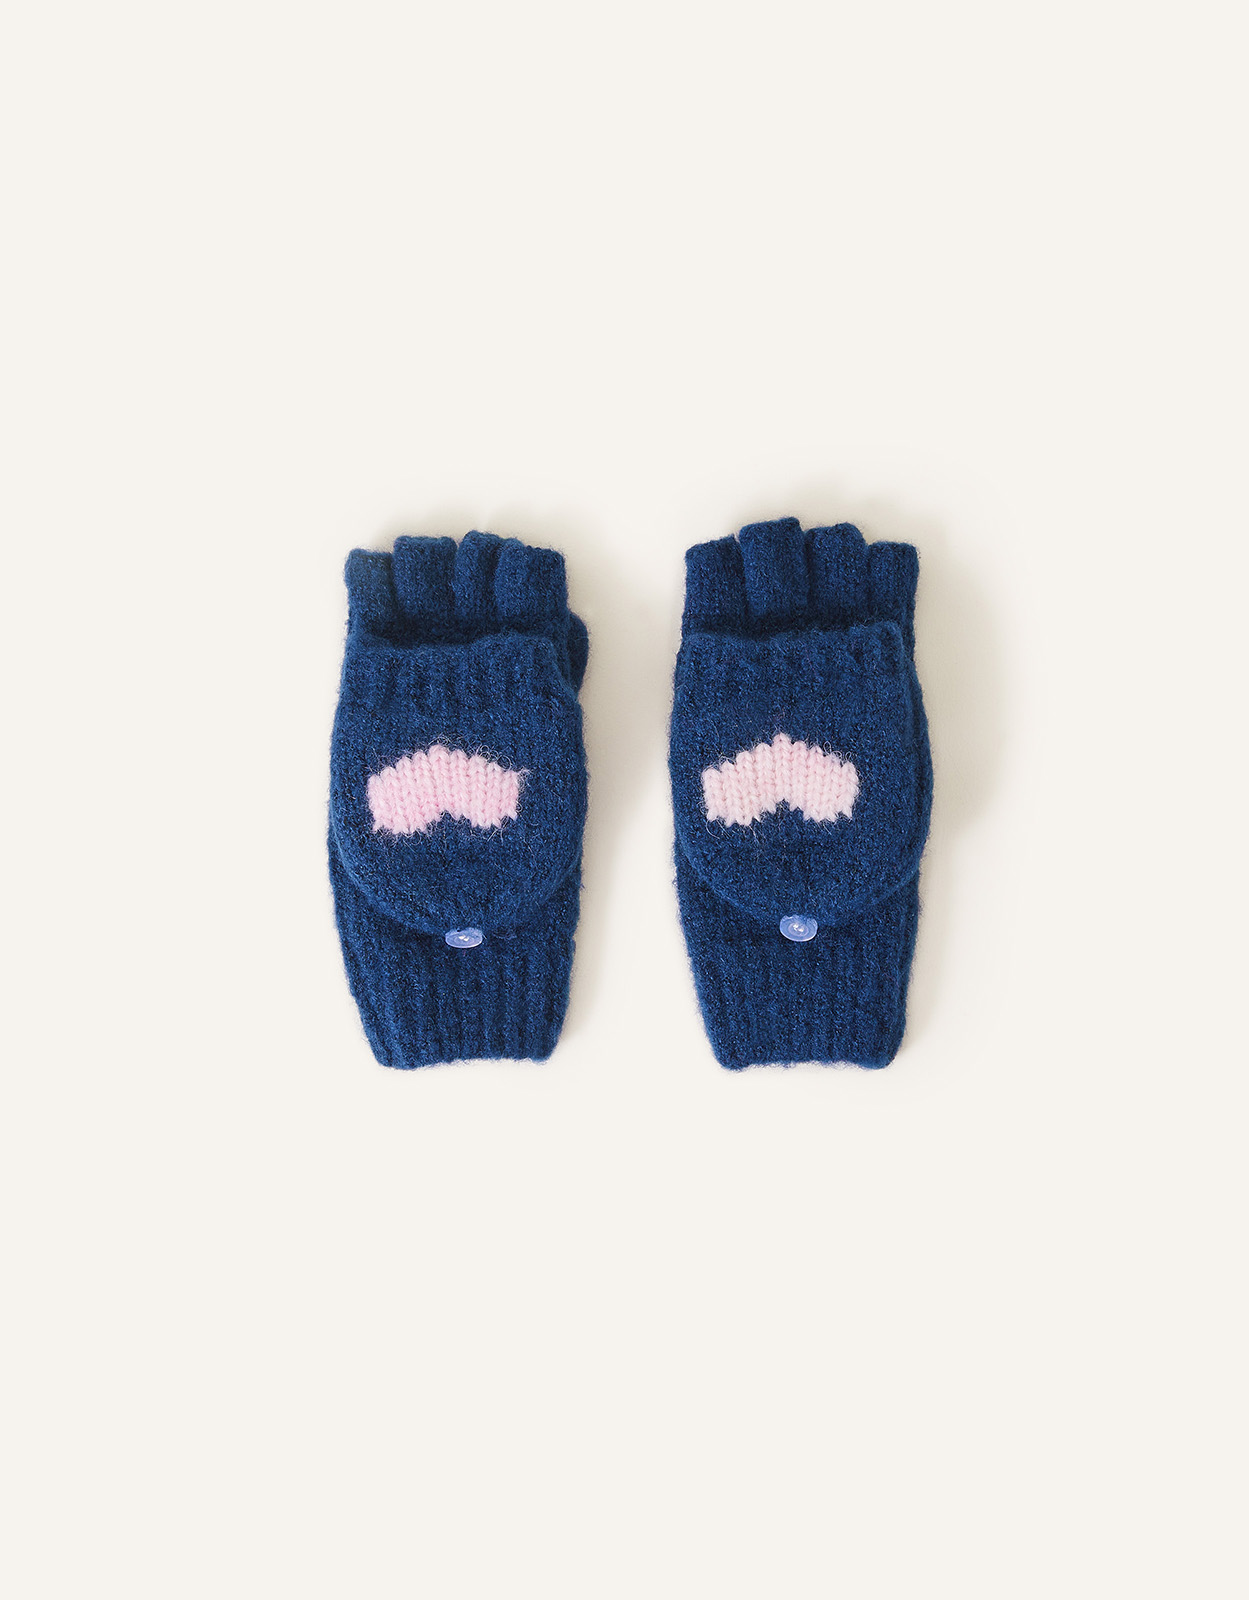 Accessorize Toddler's Heart Capped Gloves Blue, Size: 3-5 yrs